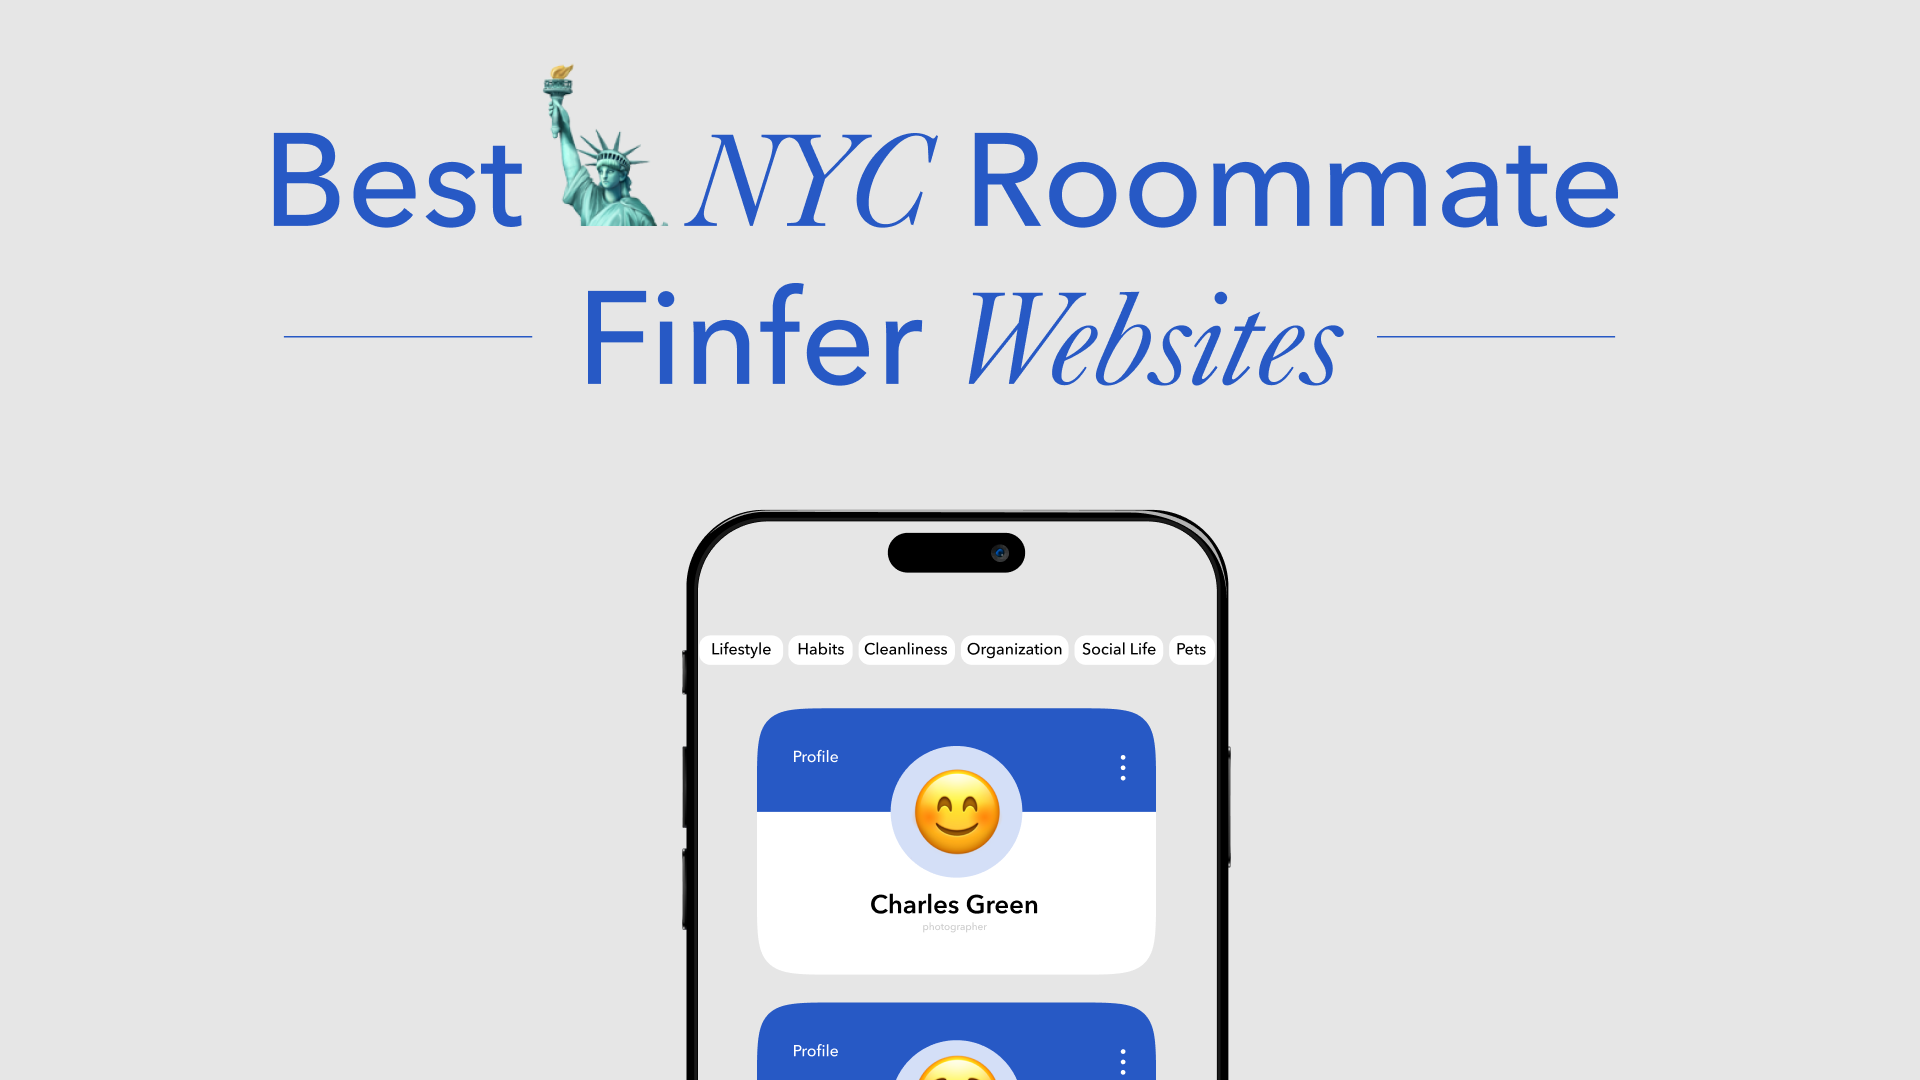 How to find roommates in NYC? Best NYC Roommate Finder Websites